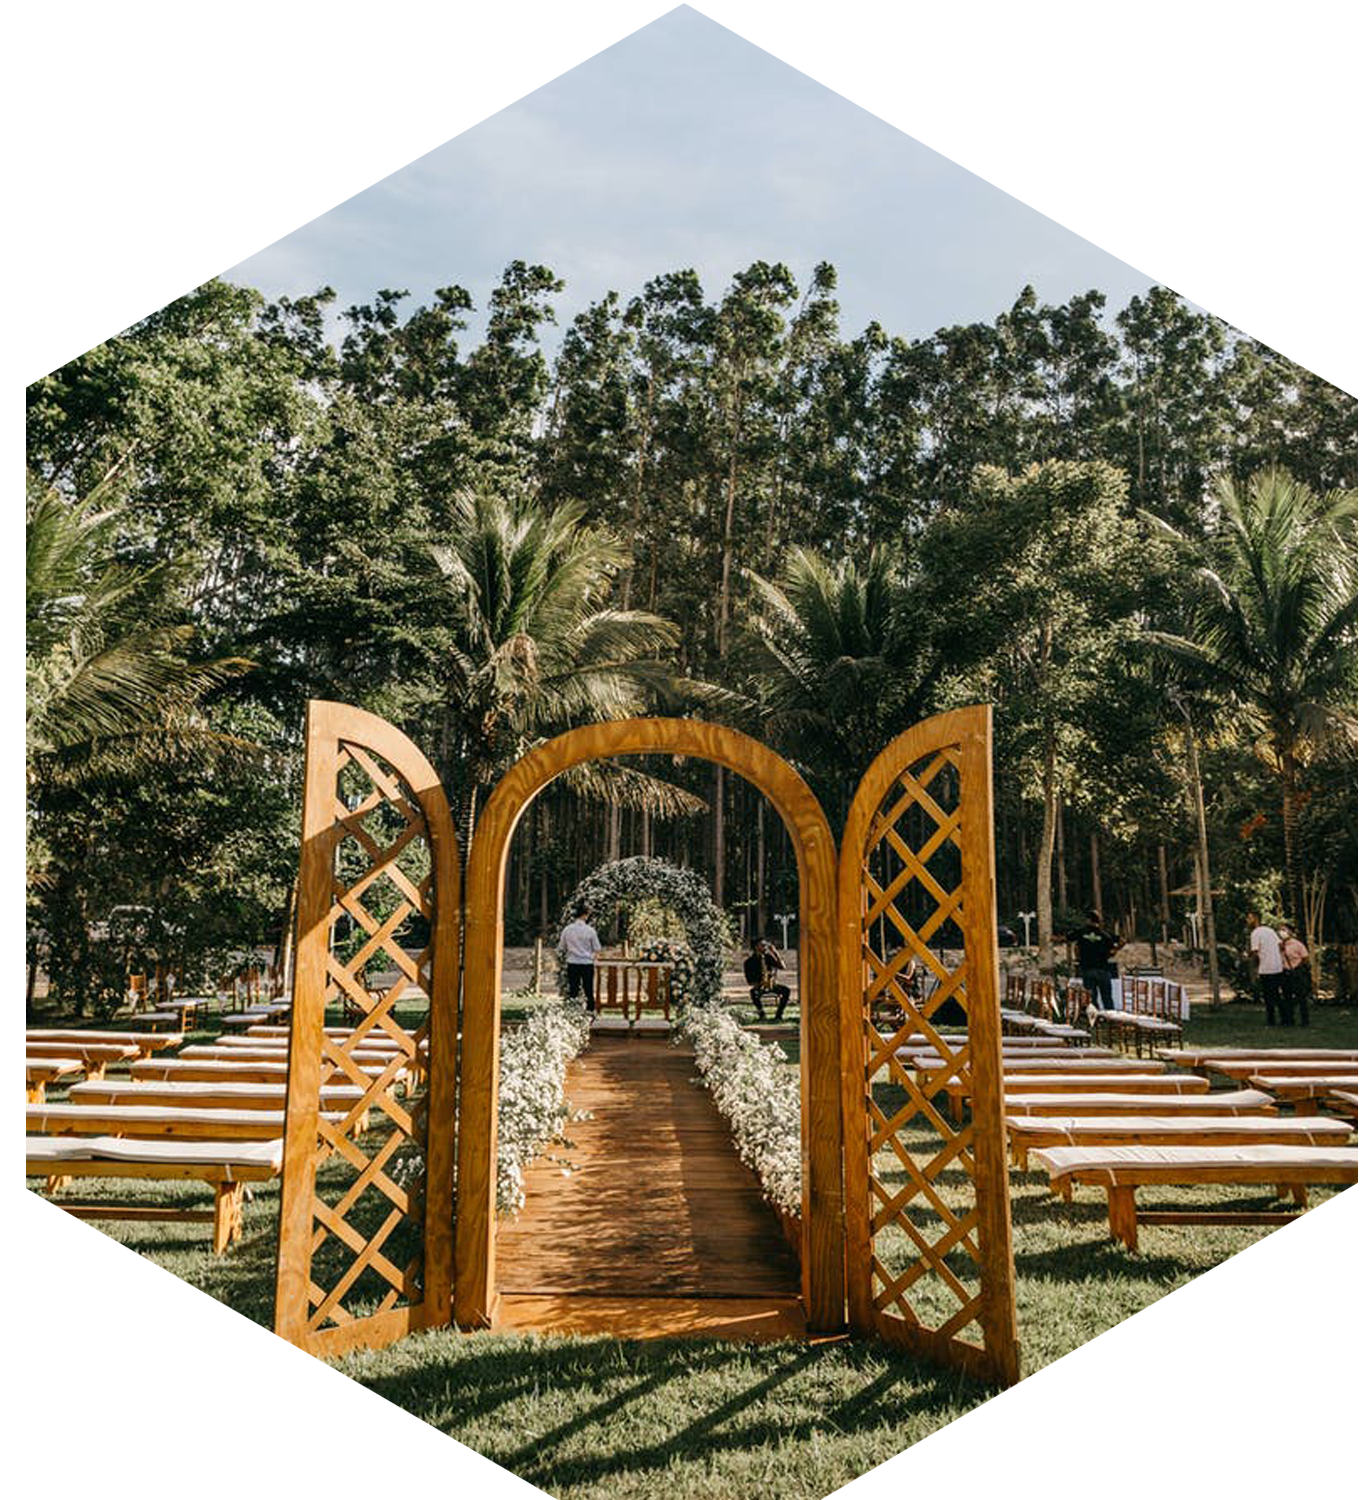 classic-arbor-and-benches-placed-in-lush-park-fro-wedding